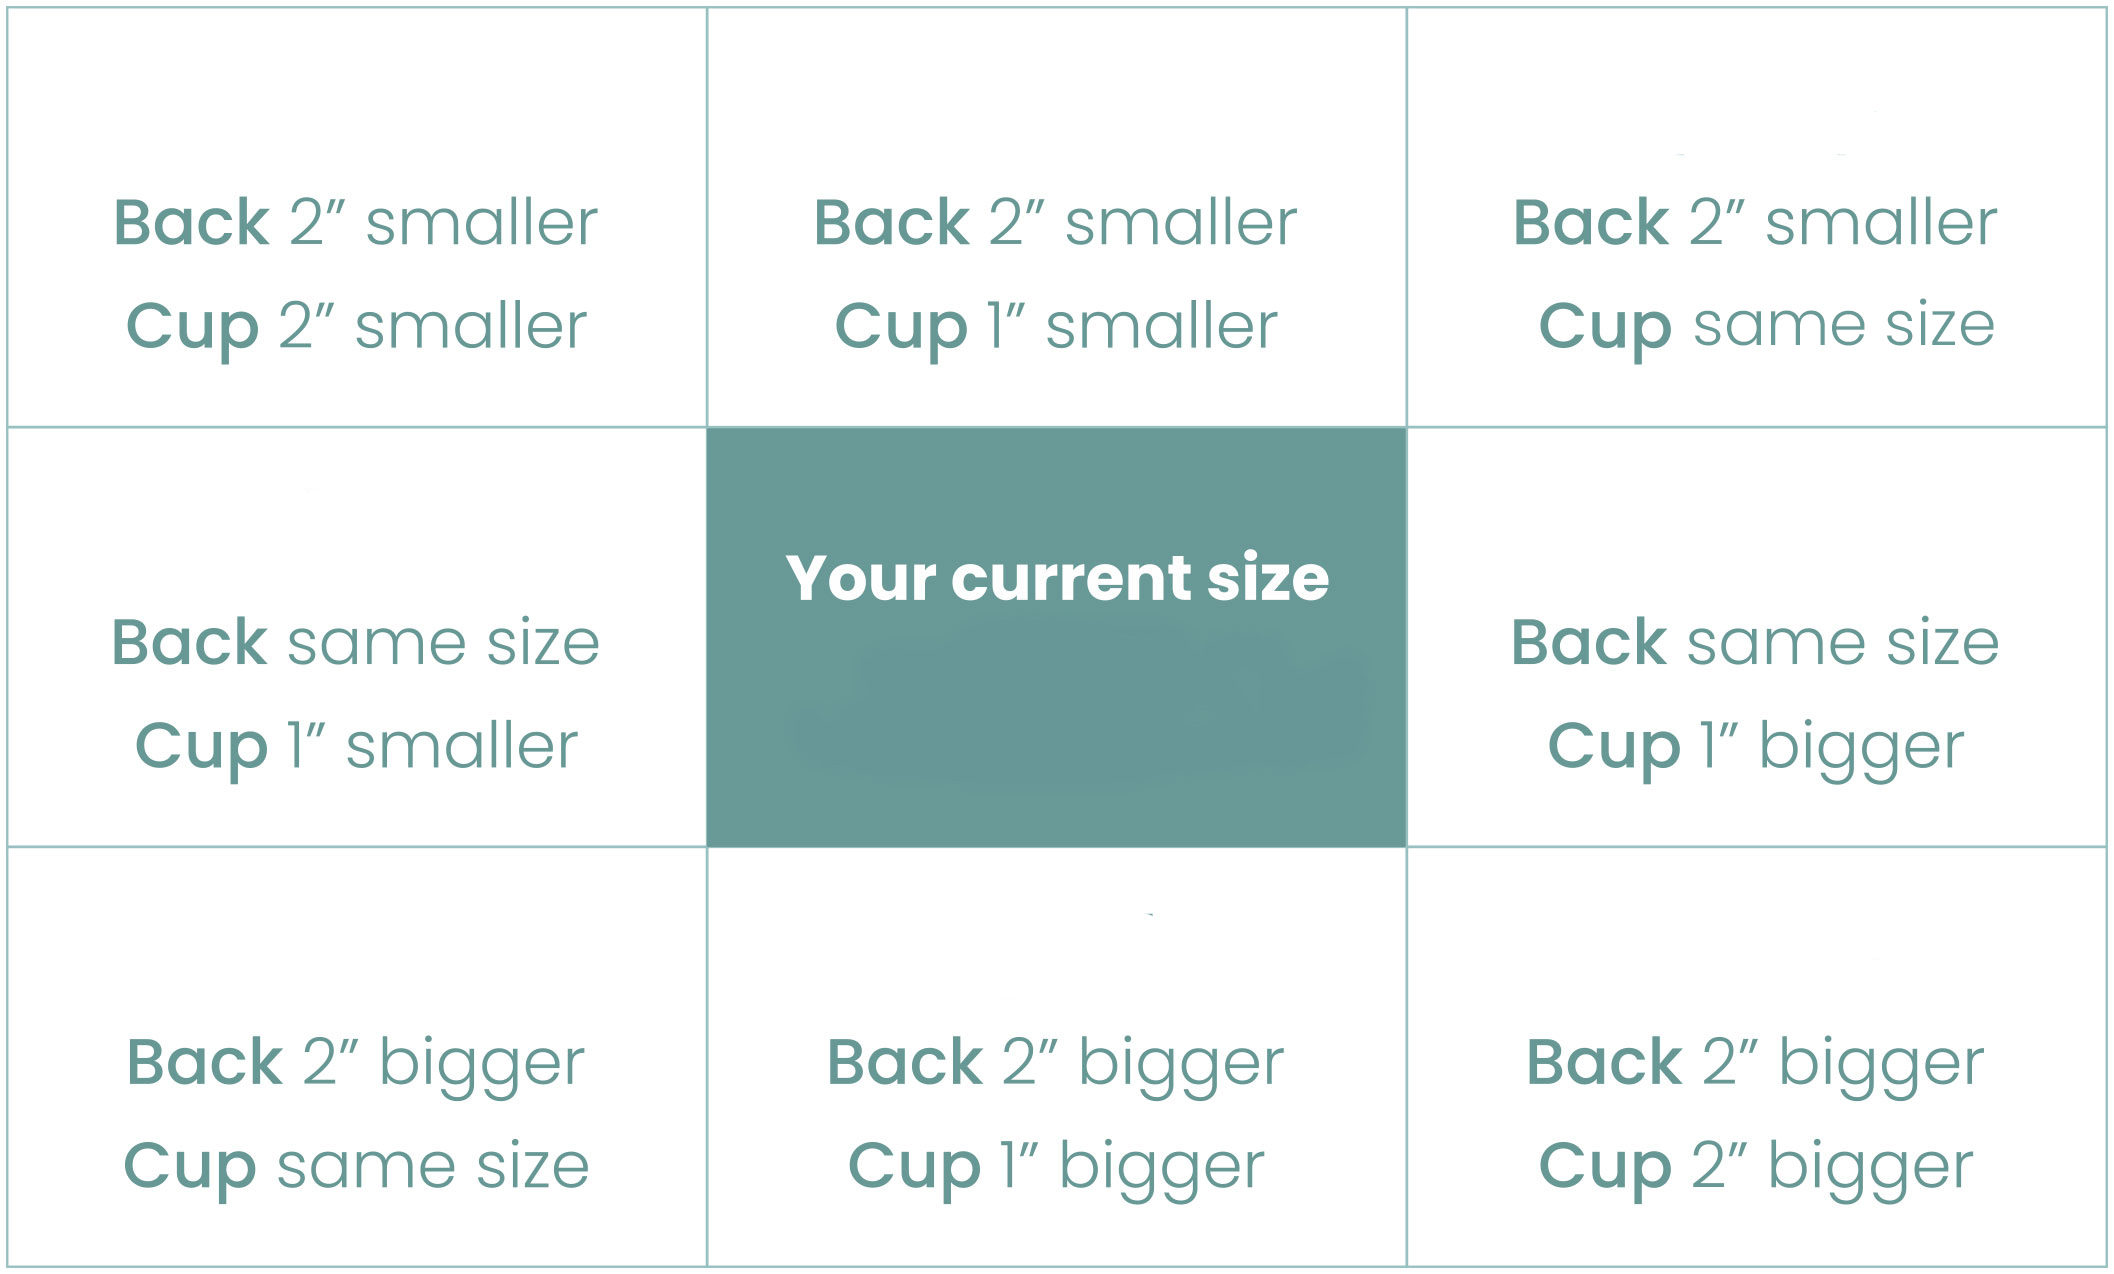 G Cup Bras: Understanding G Cup Boobs, Equivalent Cup Sizes in US